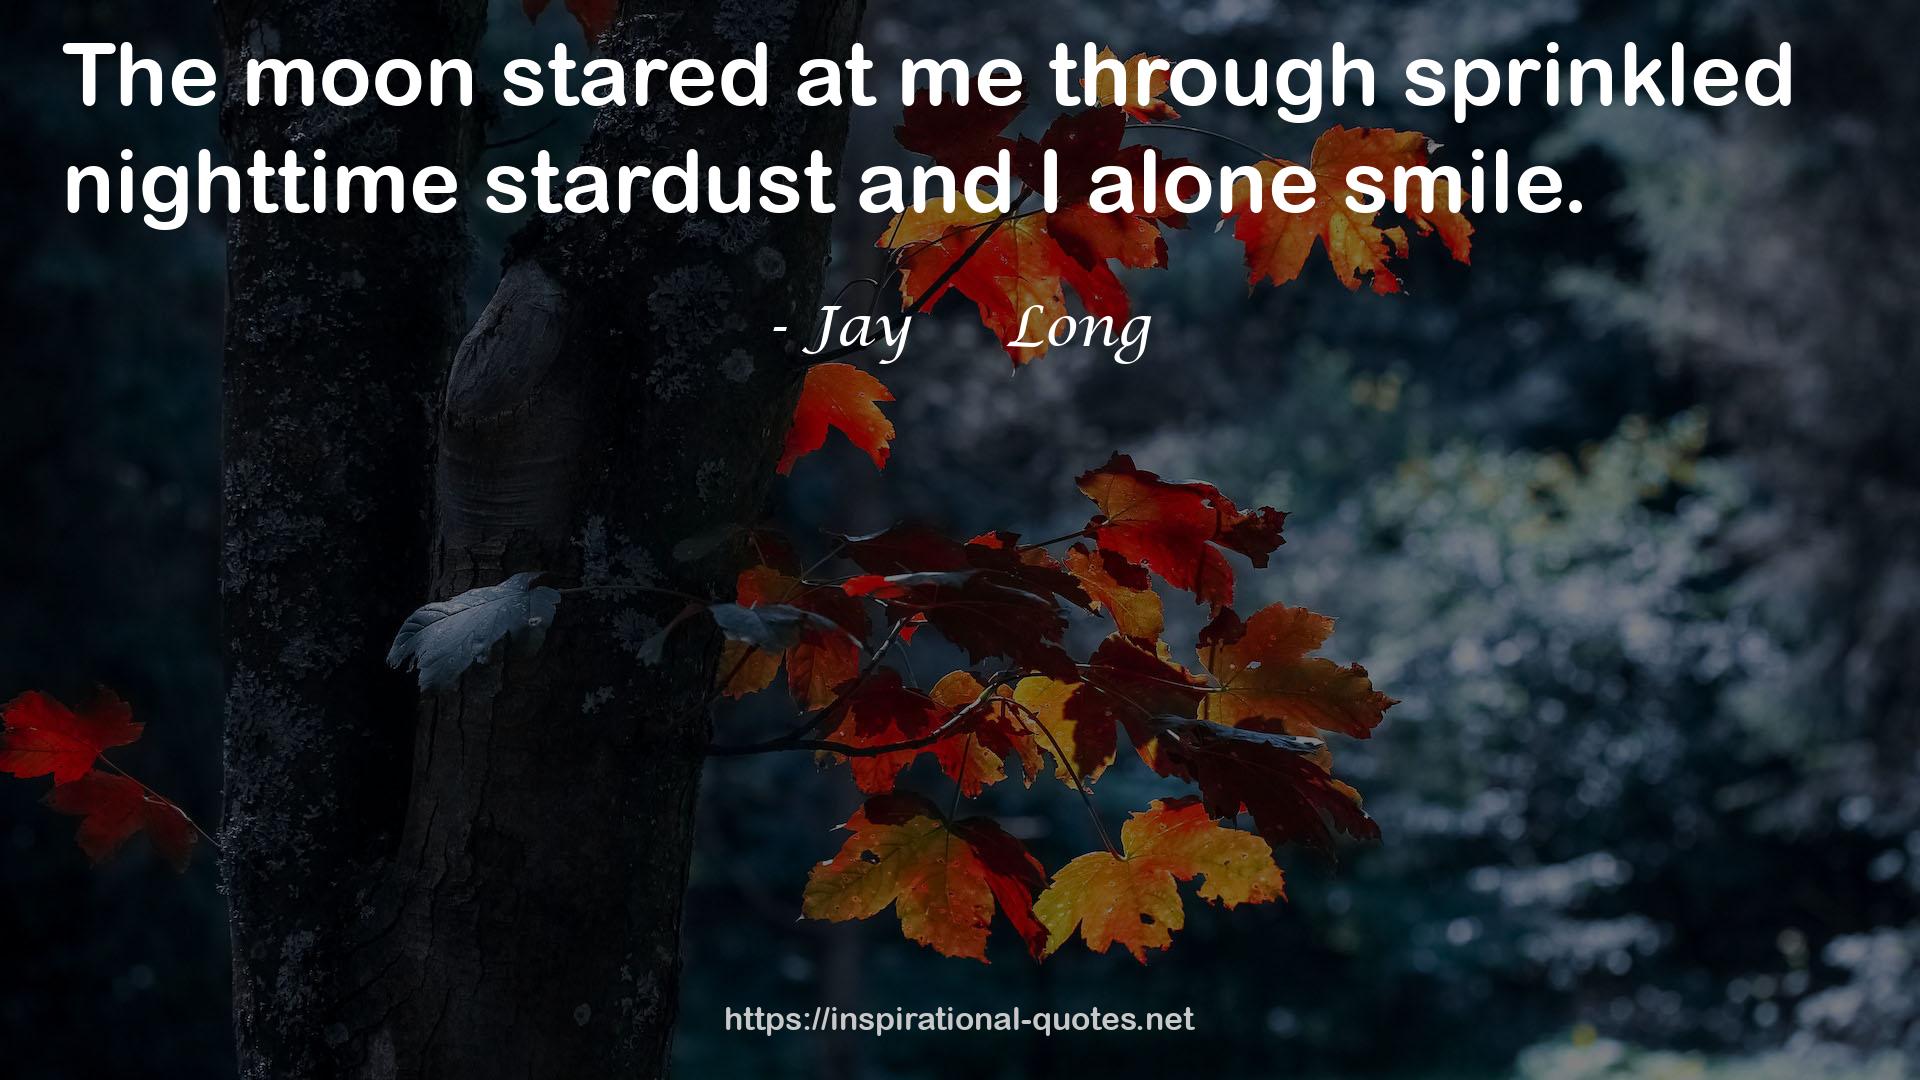 sprinkled nighttime stardust  QUOTES